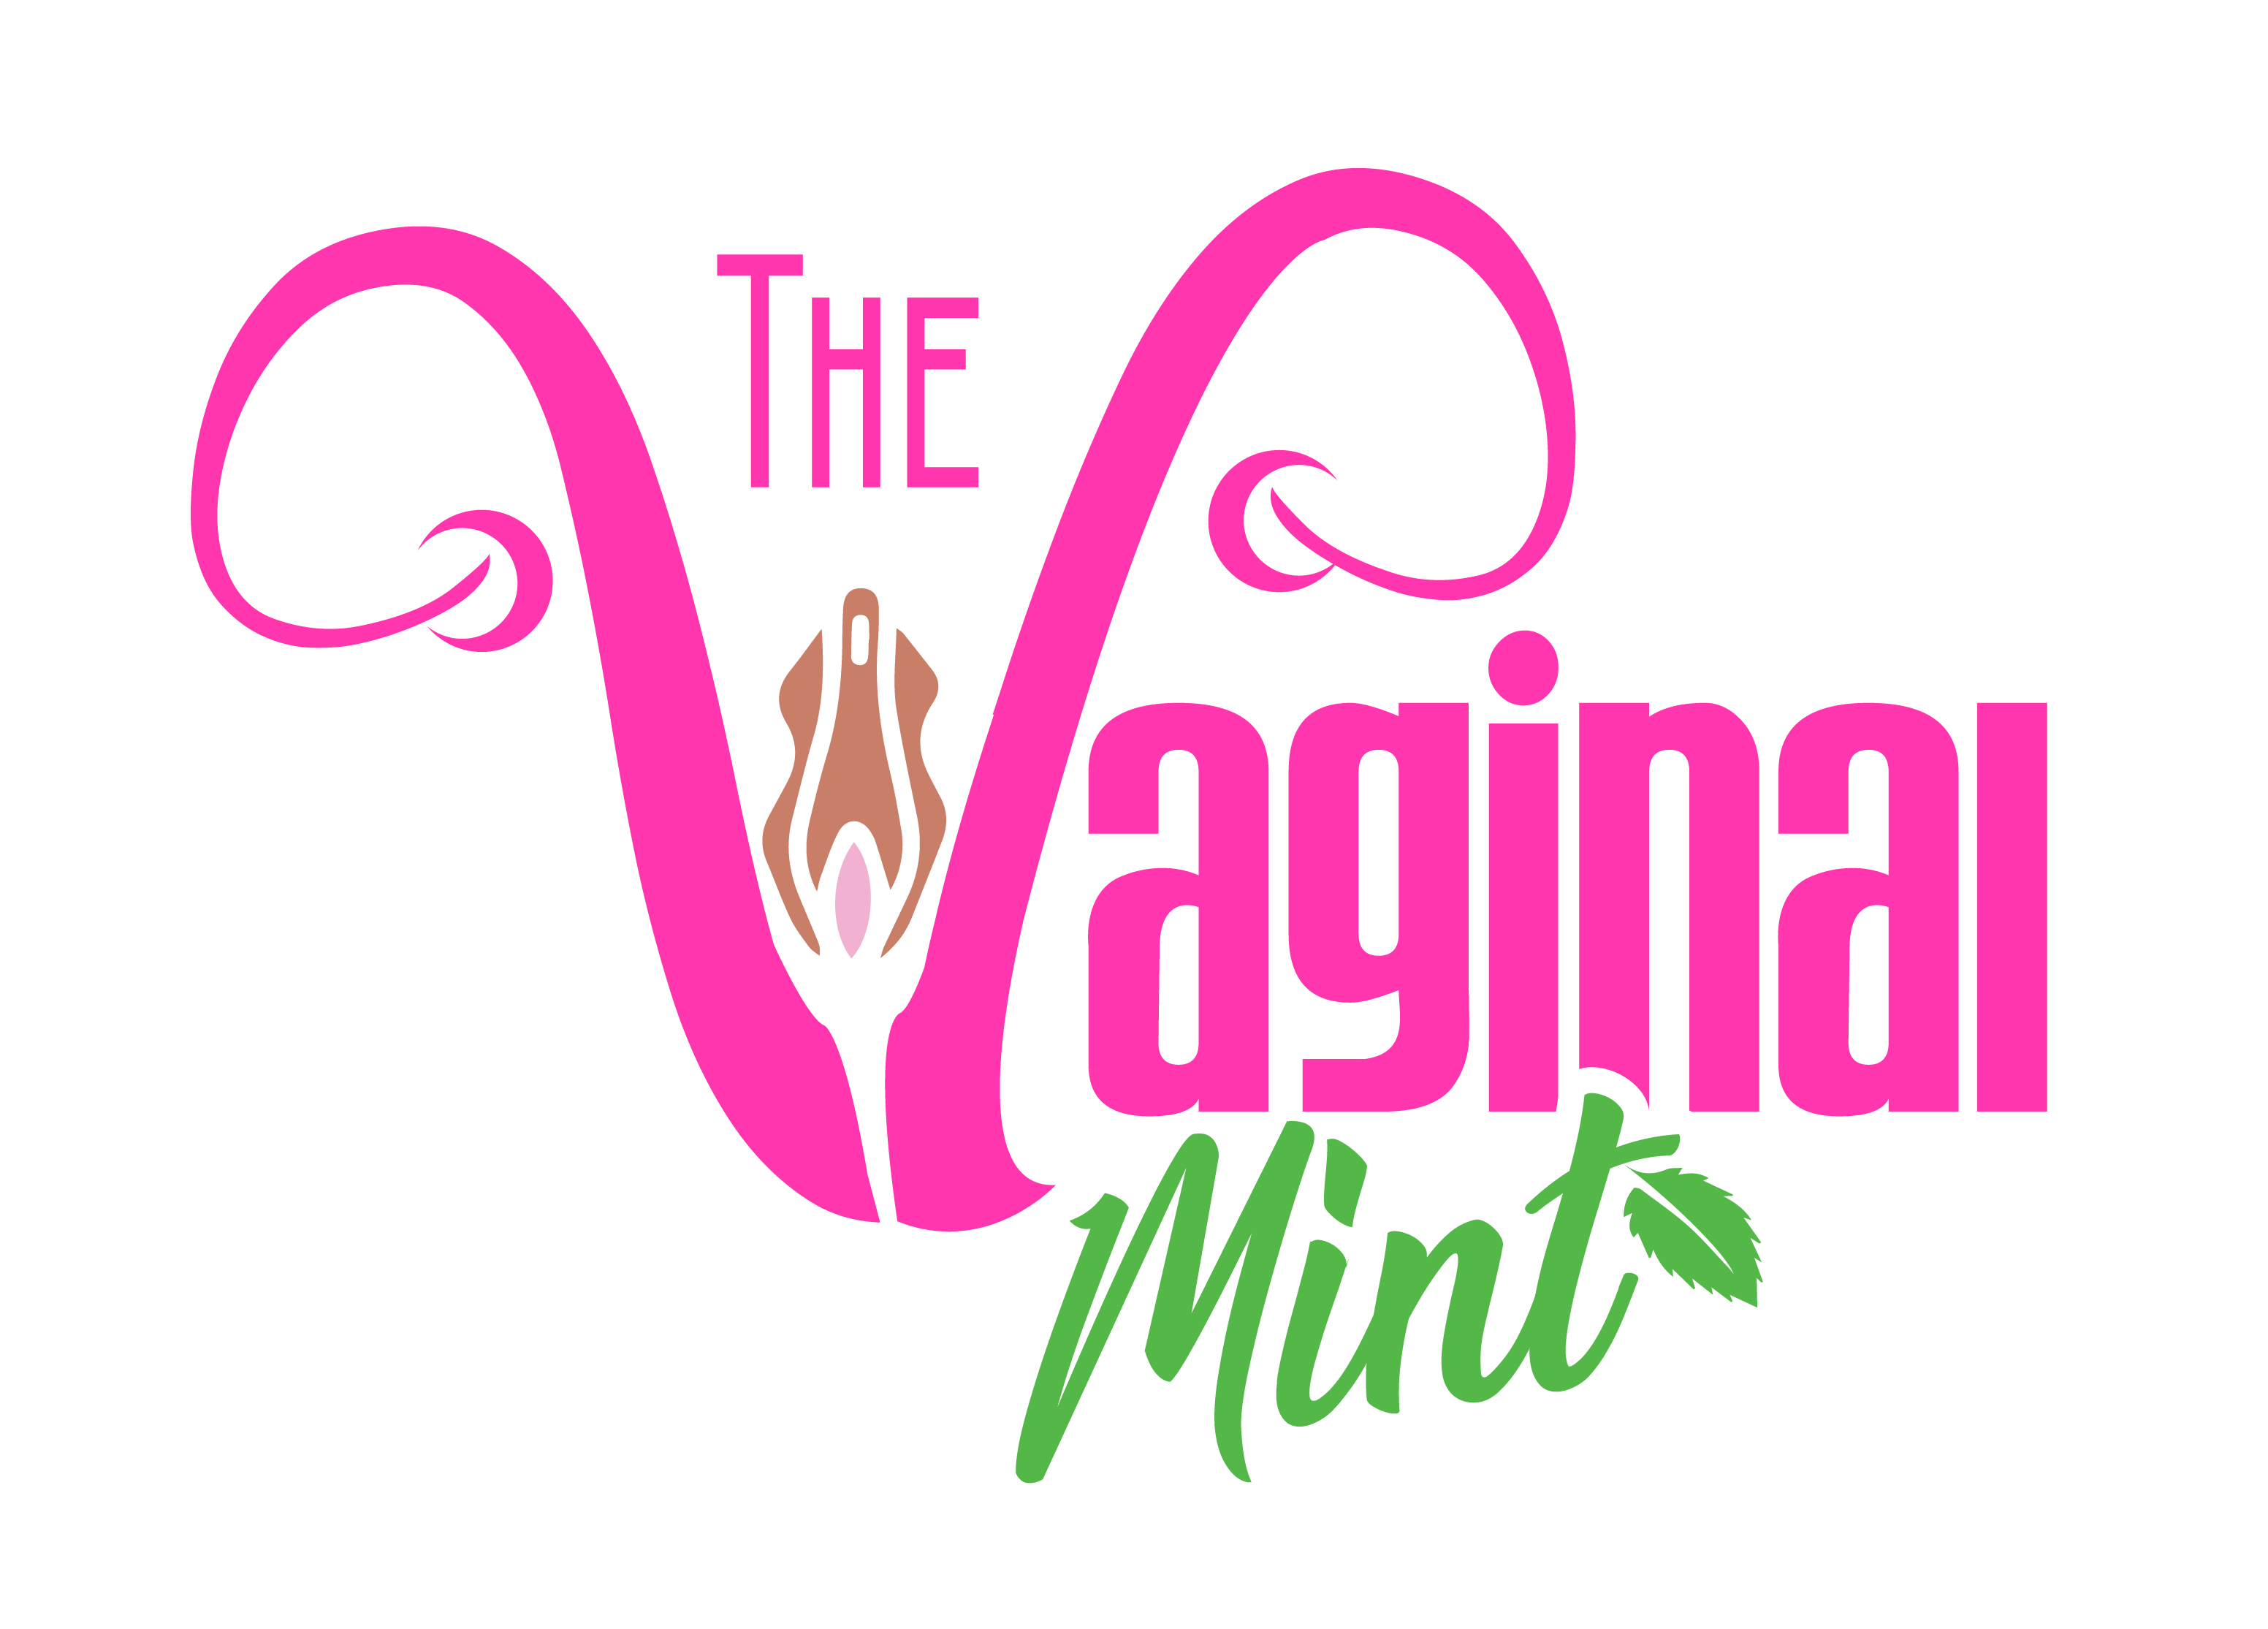 www.thevaginalmint.com